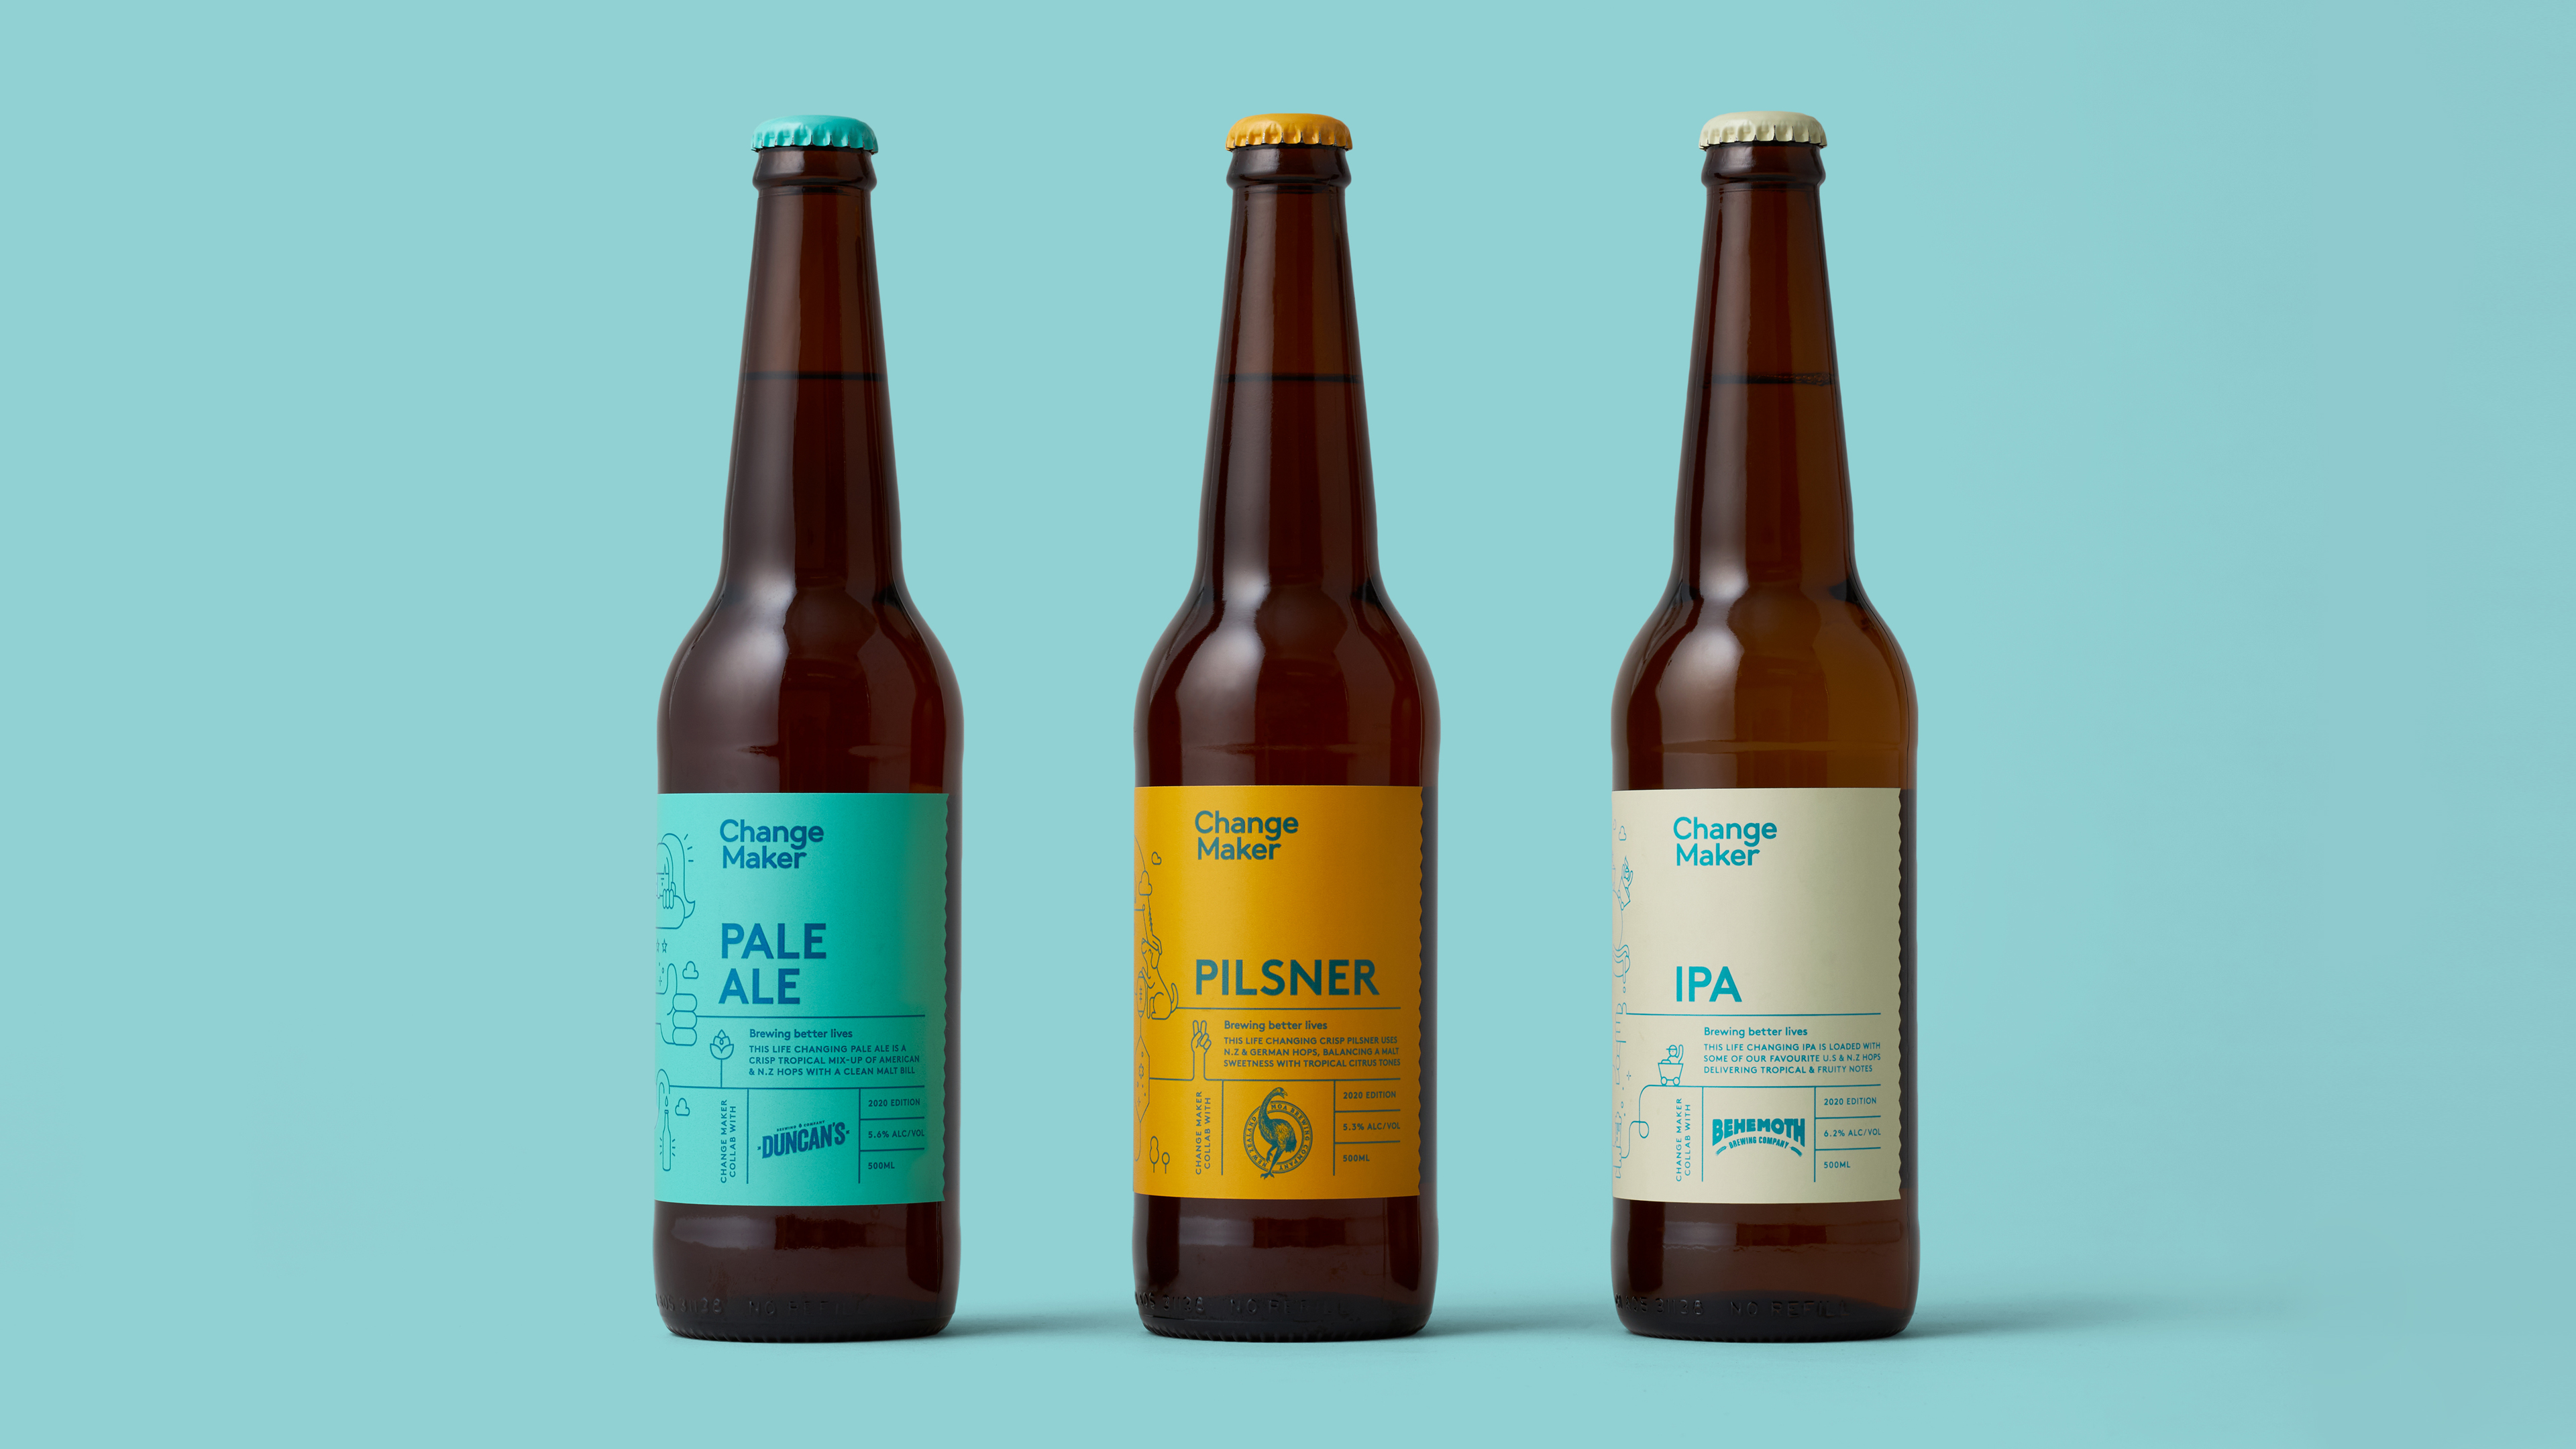 Change Maker Beer Is a Project With the Power to Fundamentally Change Lives